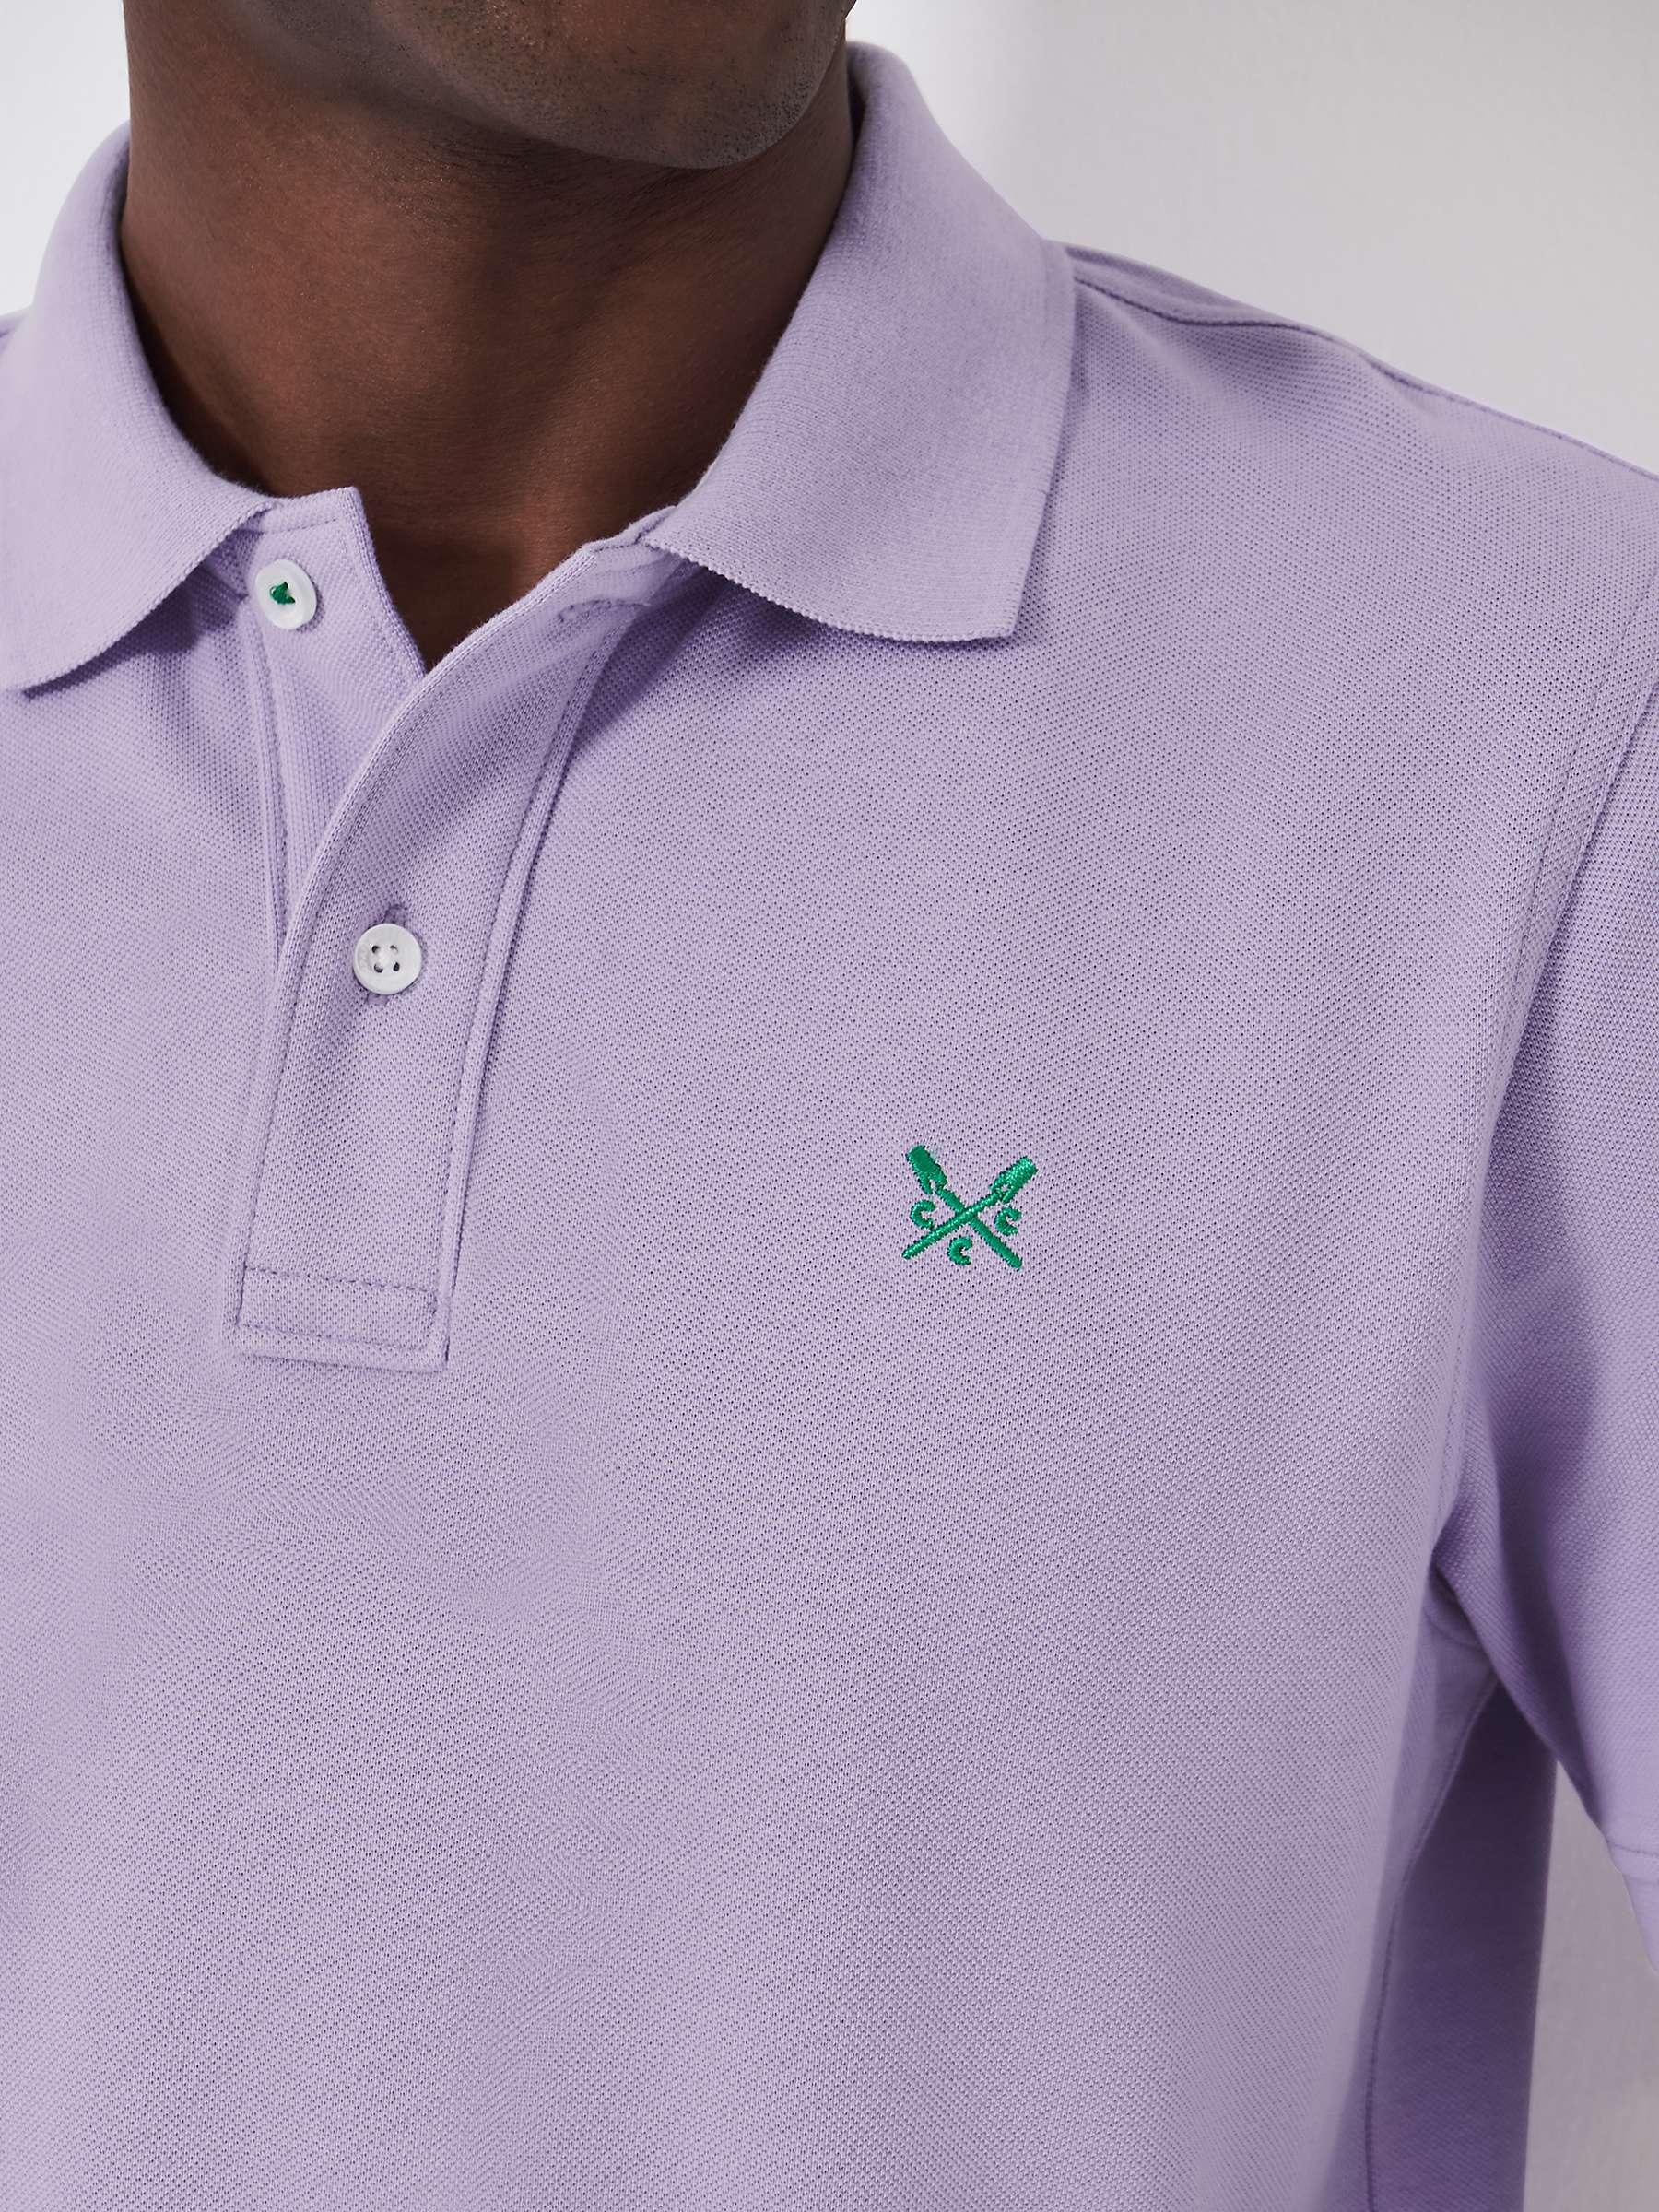 Buy Crew Clothing Classic Pique Polo Top Online at johnlewis.com